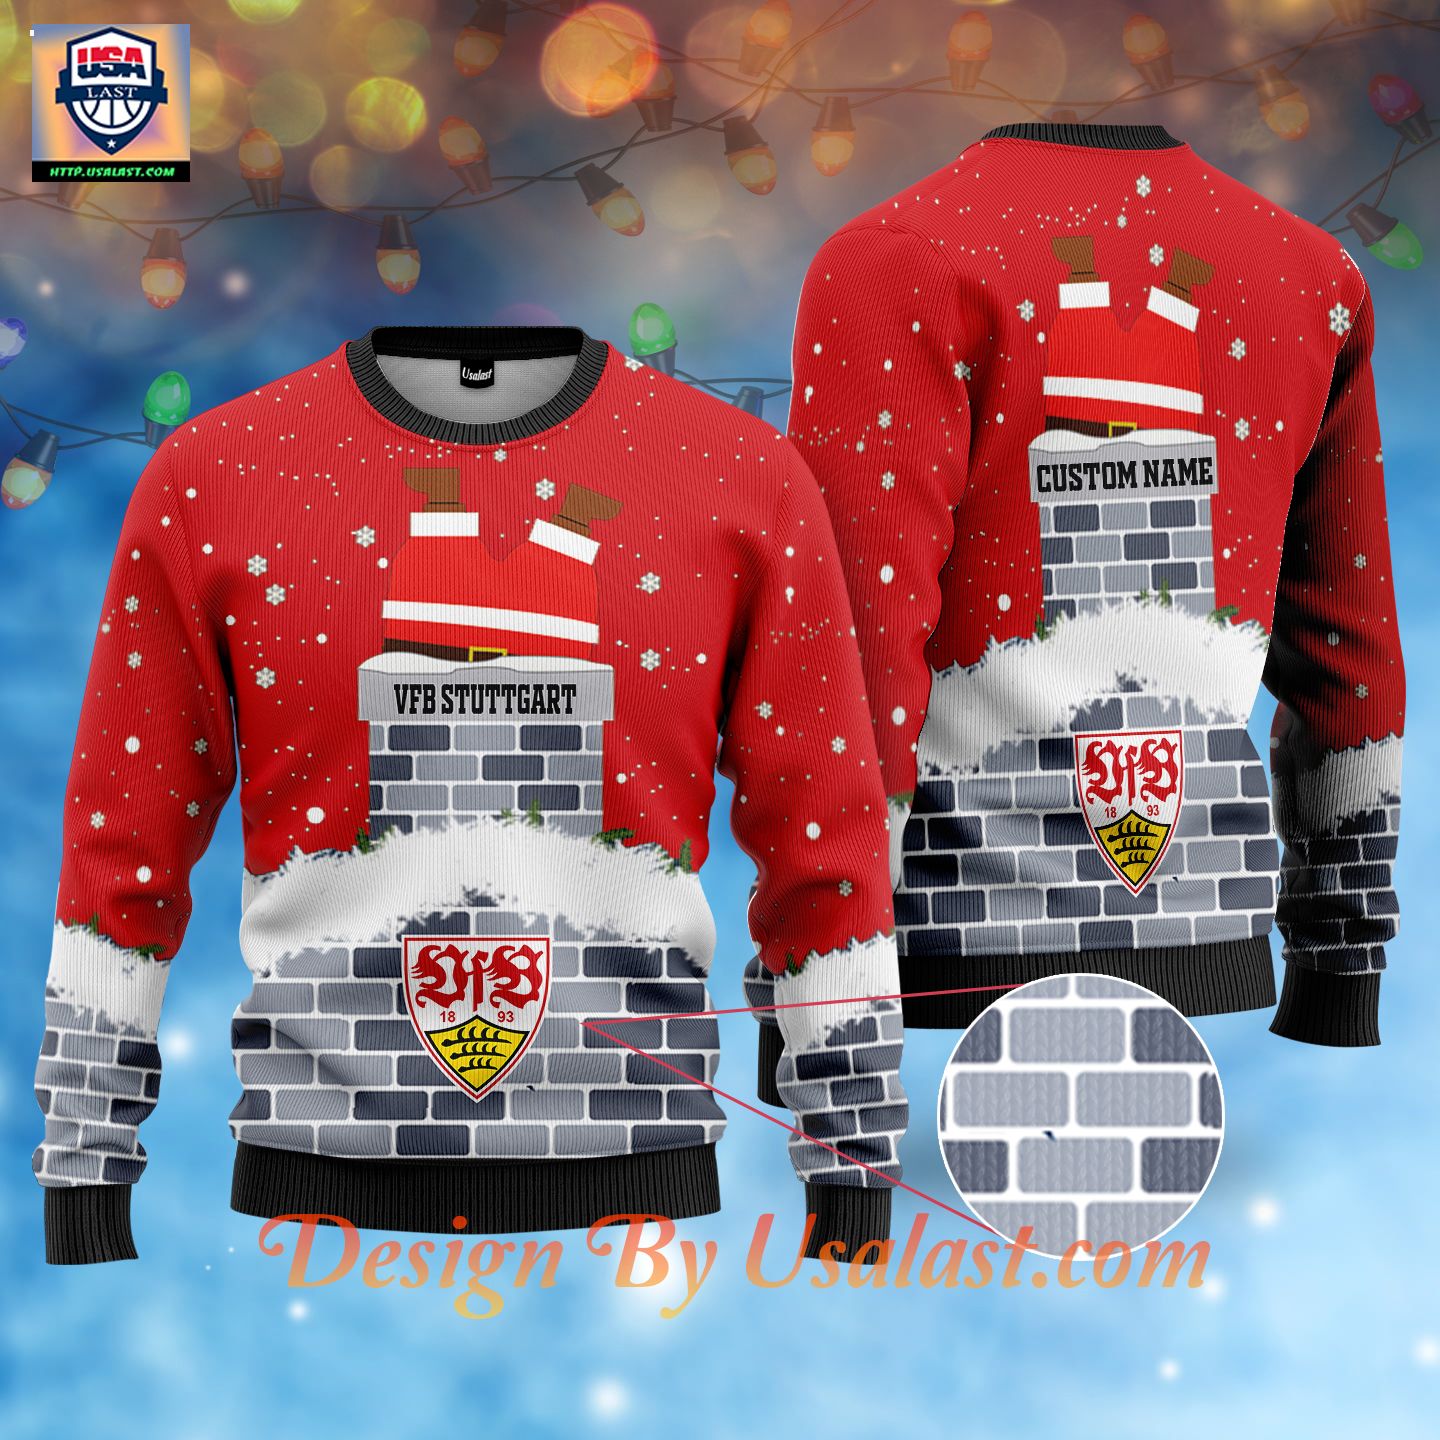 Unique VfB Stuttgart Custom Name Ugly Christmas Sweater – Red Version